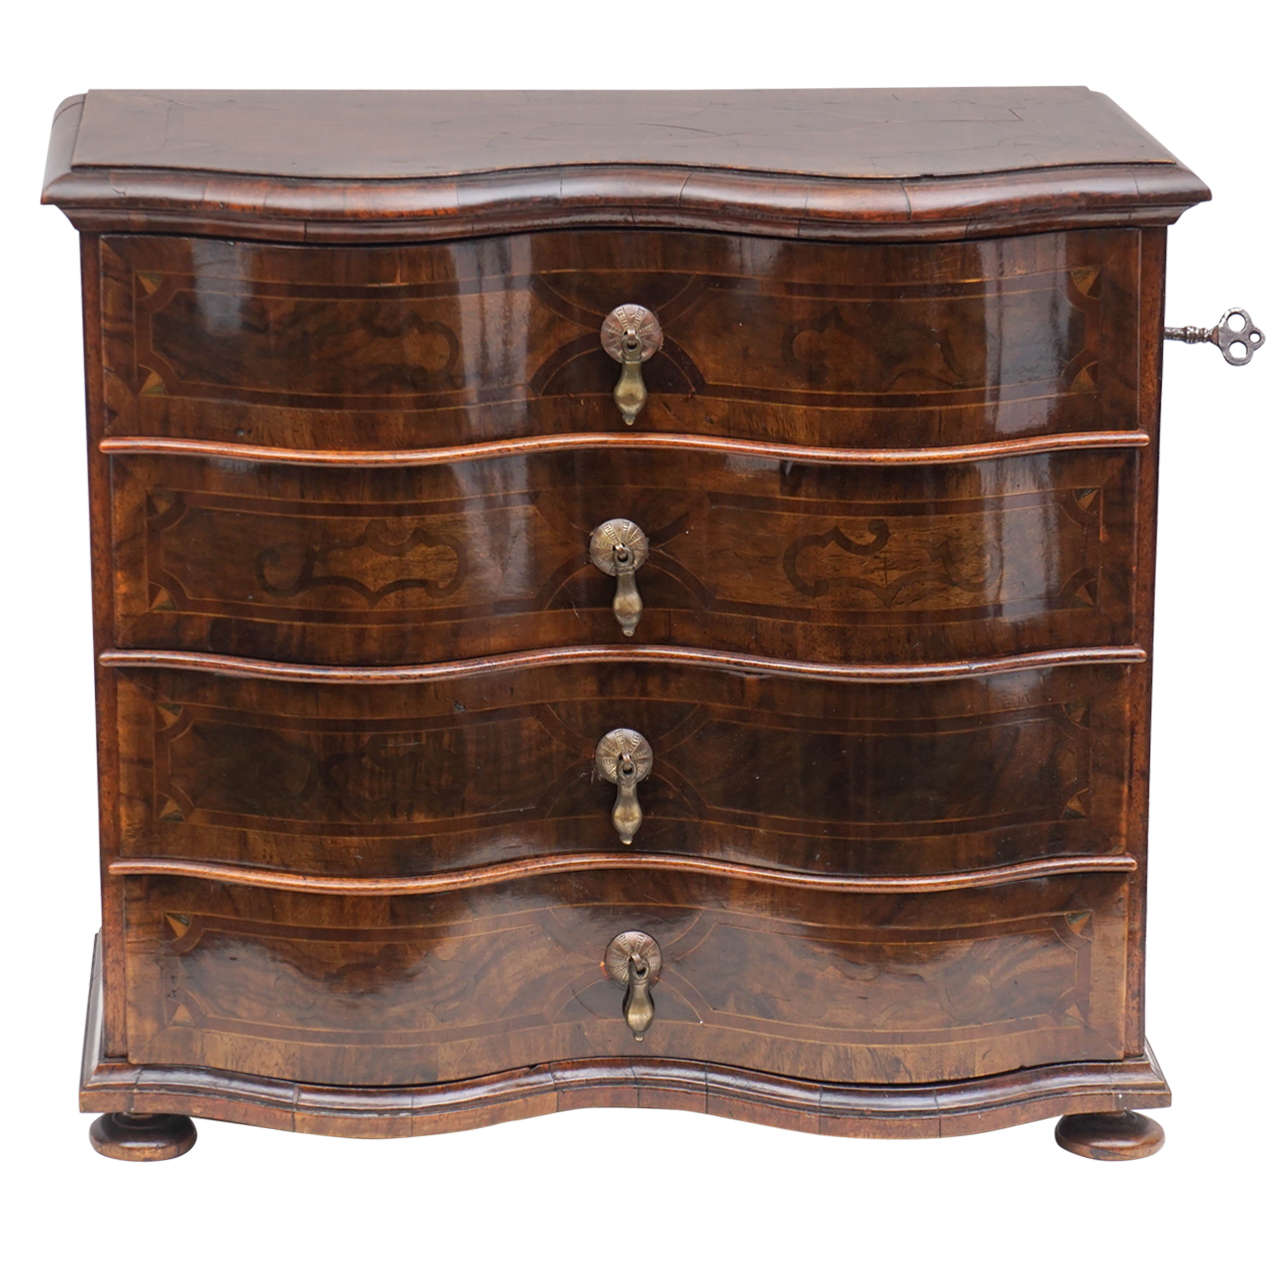 German Rococo Style Walnut Inlaid Miniature Chest of Drawers or Jewelry Box